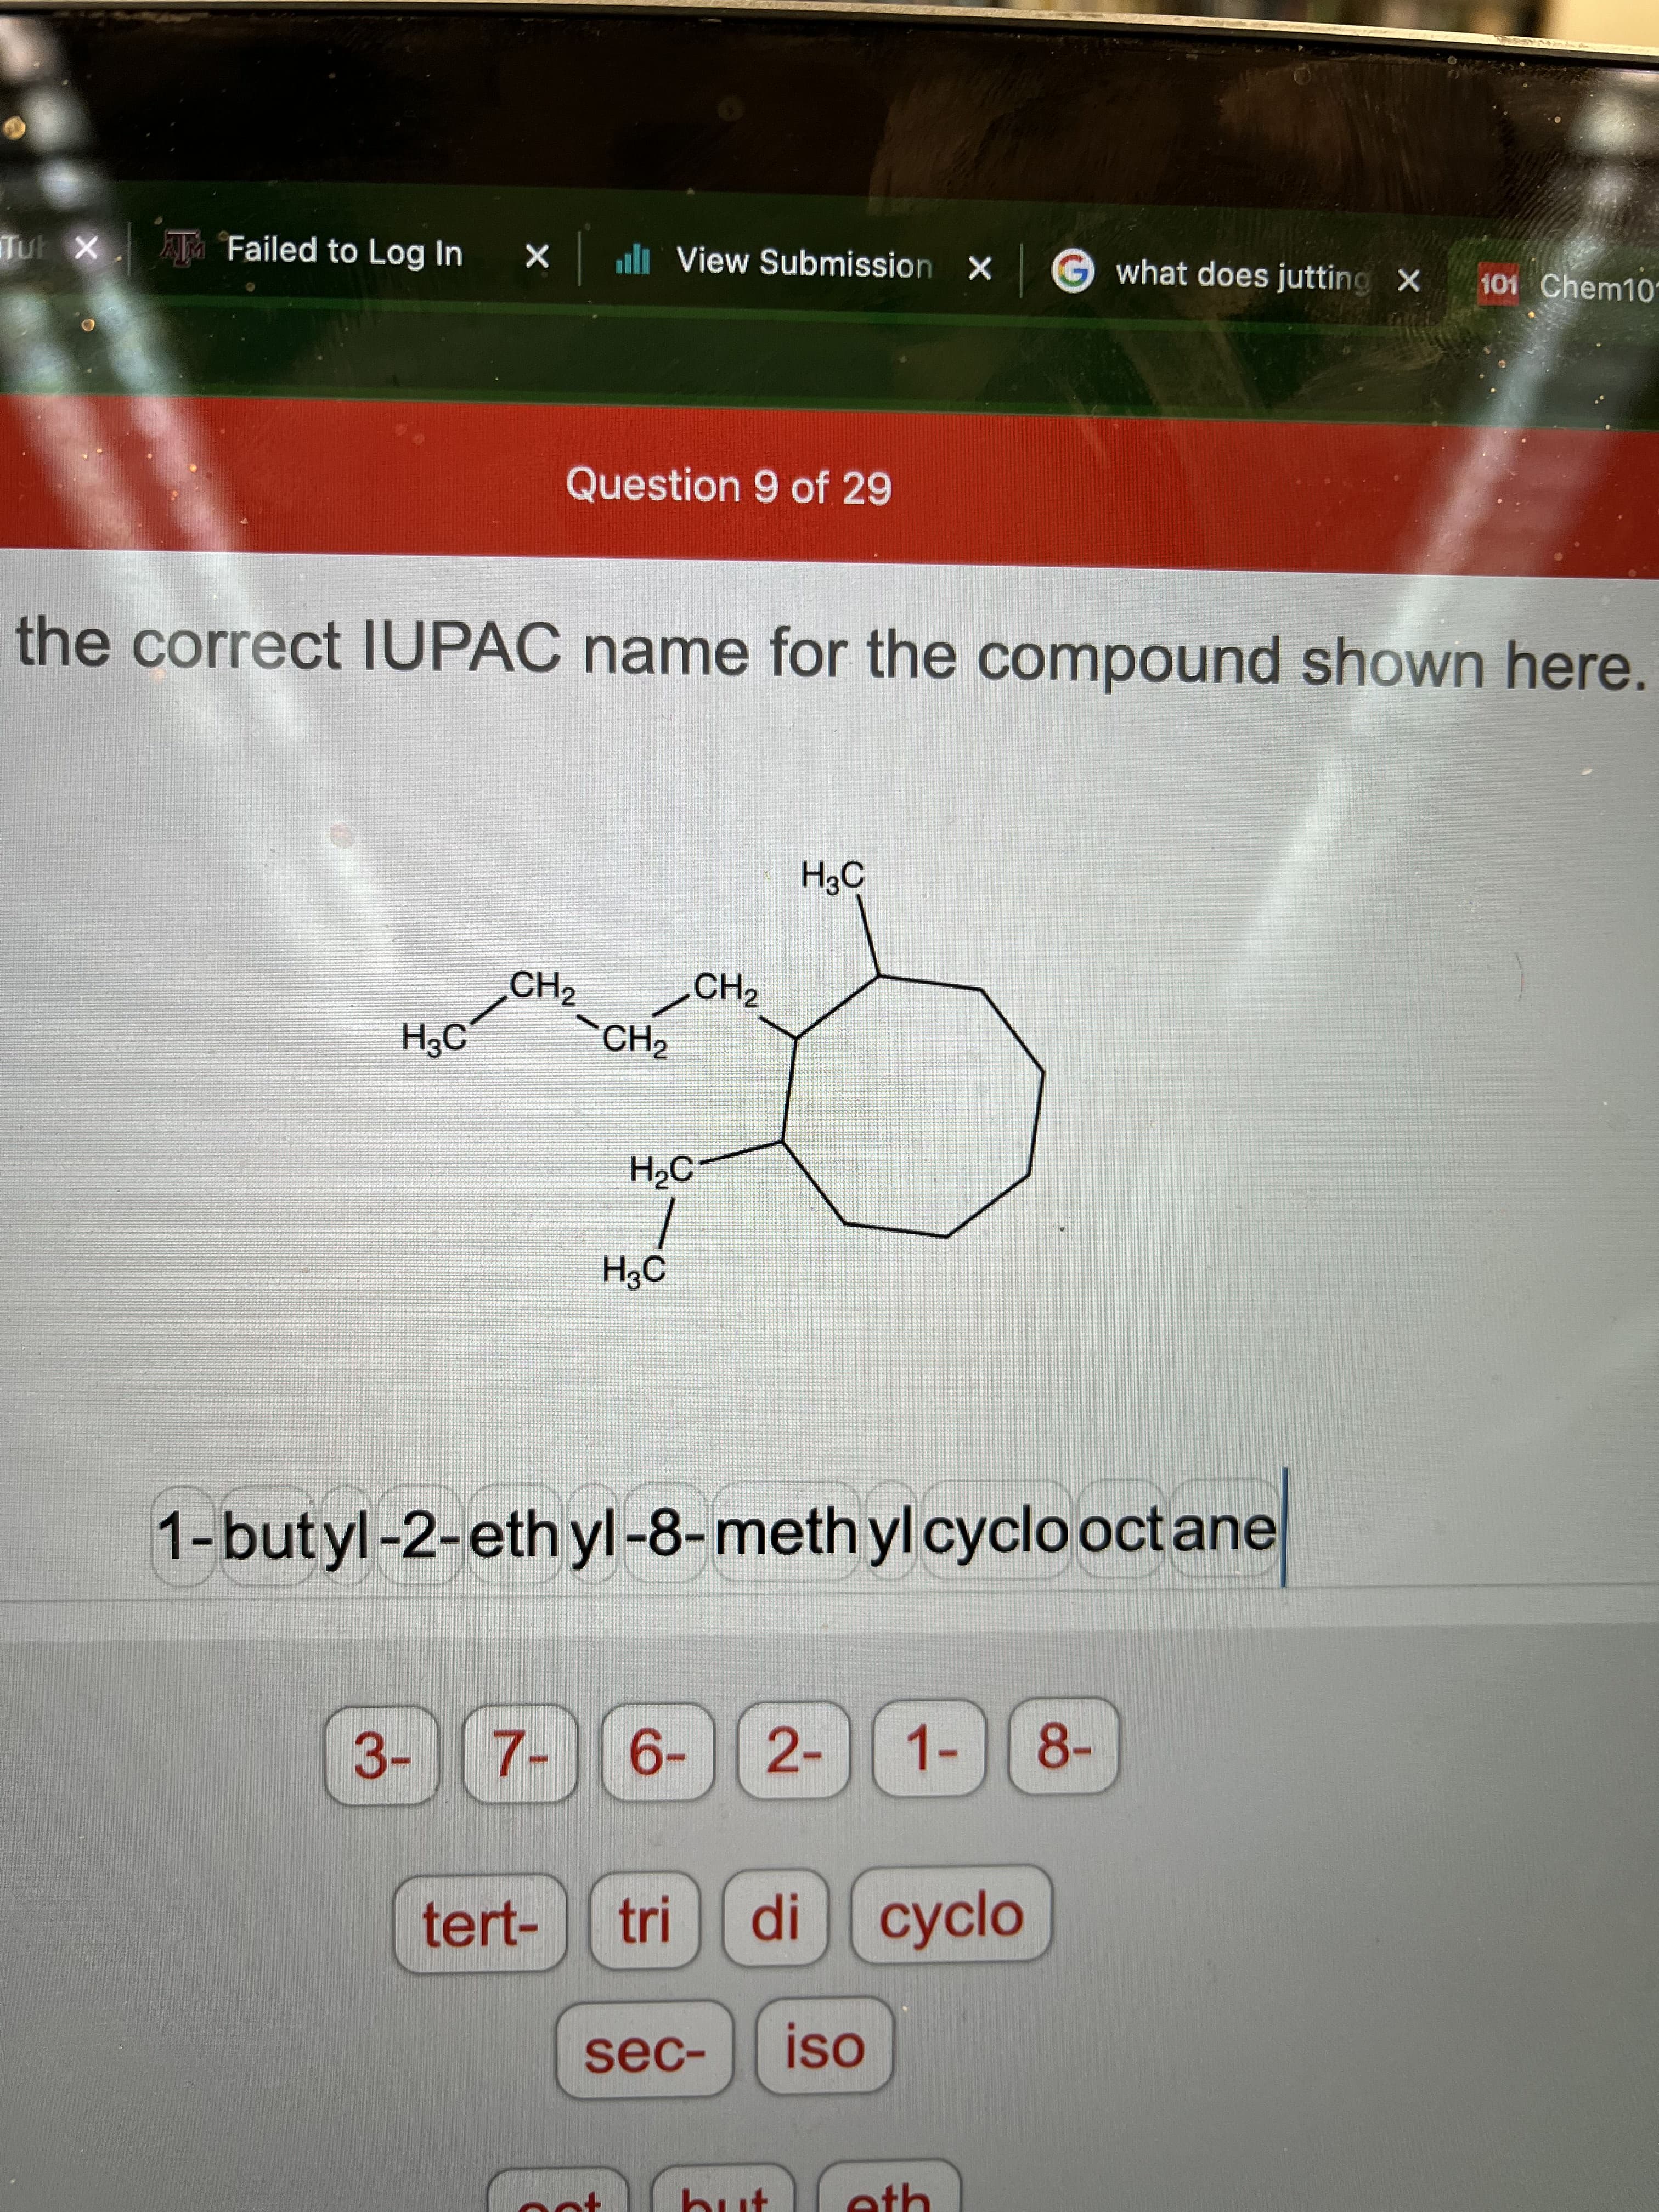 Tu X
Ta Failed to Log In
l View Submission X
Gwhat does jutting X
101 Chem10
Question 9 of 29
the correct IUPAC name for the compound shown here.
H3C
CH2
CH2
H3C
`CH2
H2C-
1-butyl-2-eth yl-8-meth yl cyclo octane
3- 7-
6- 2- 1-
8-
tert-
tri
di сyclo
sec-
eth
